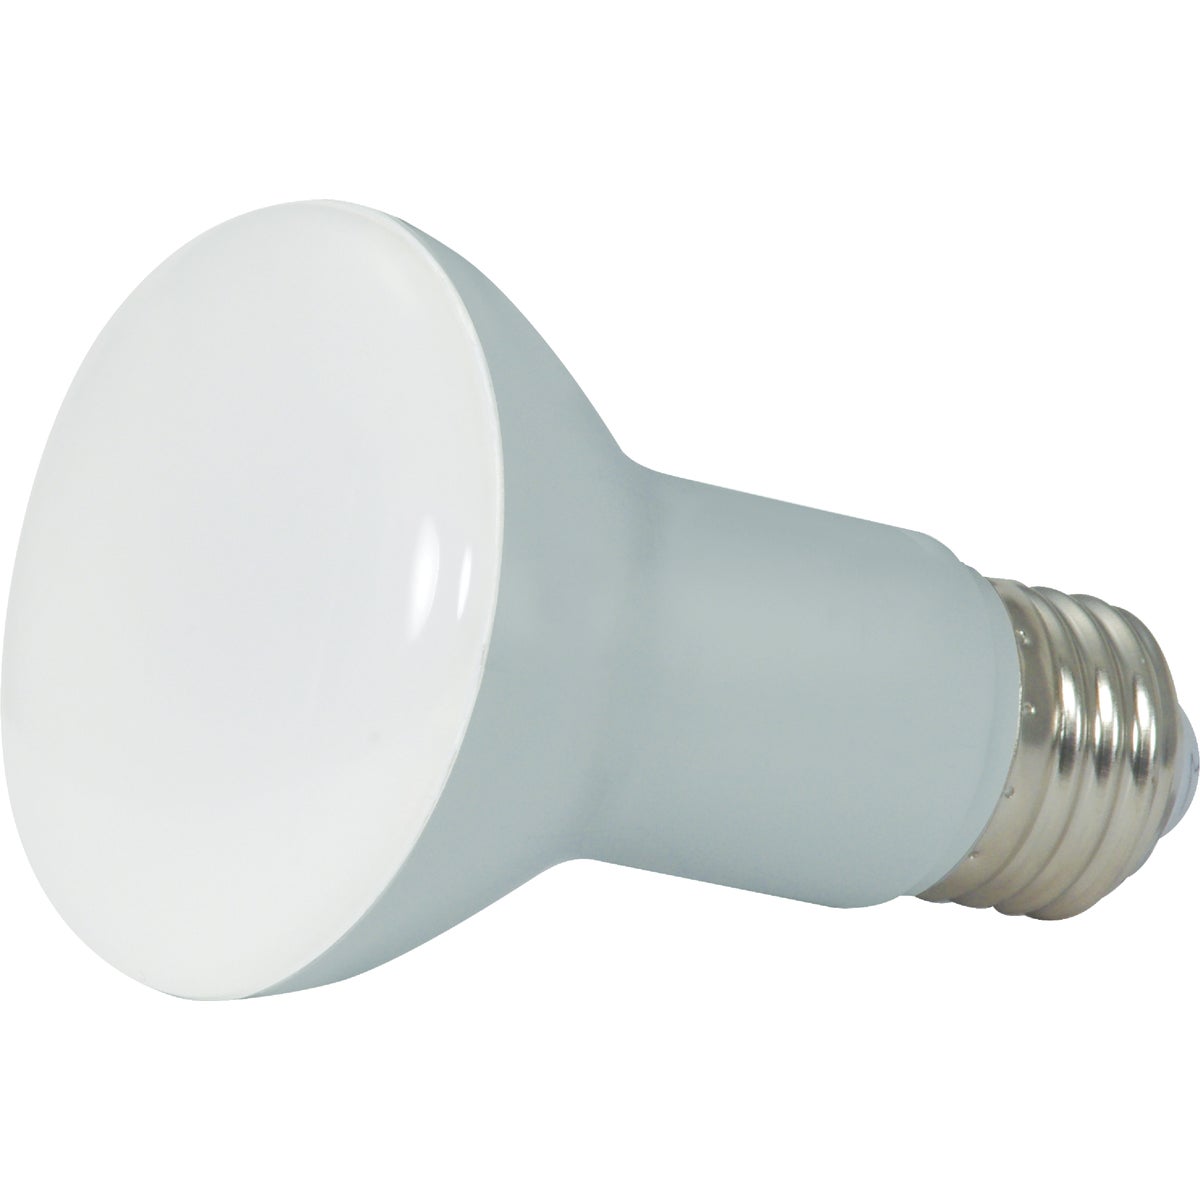 Item 508130, Dimmable, solid state R20 LED (light emitting diode) light bulb with medium